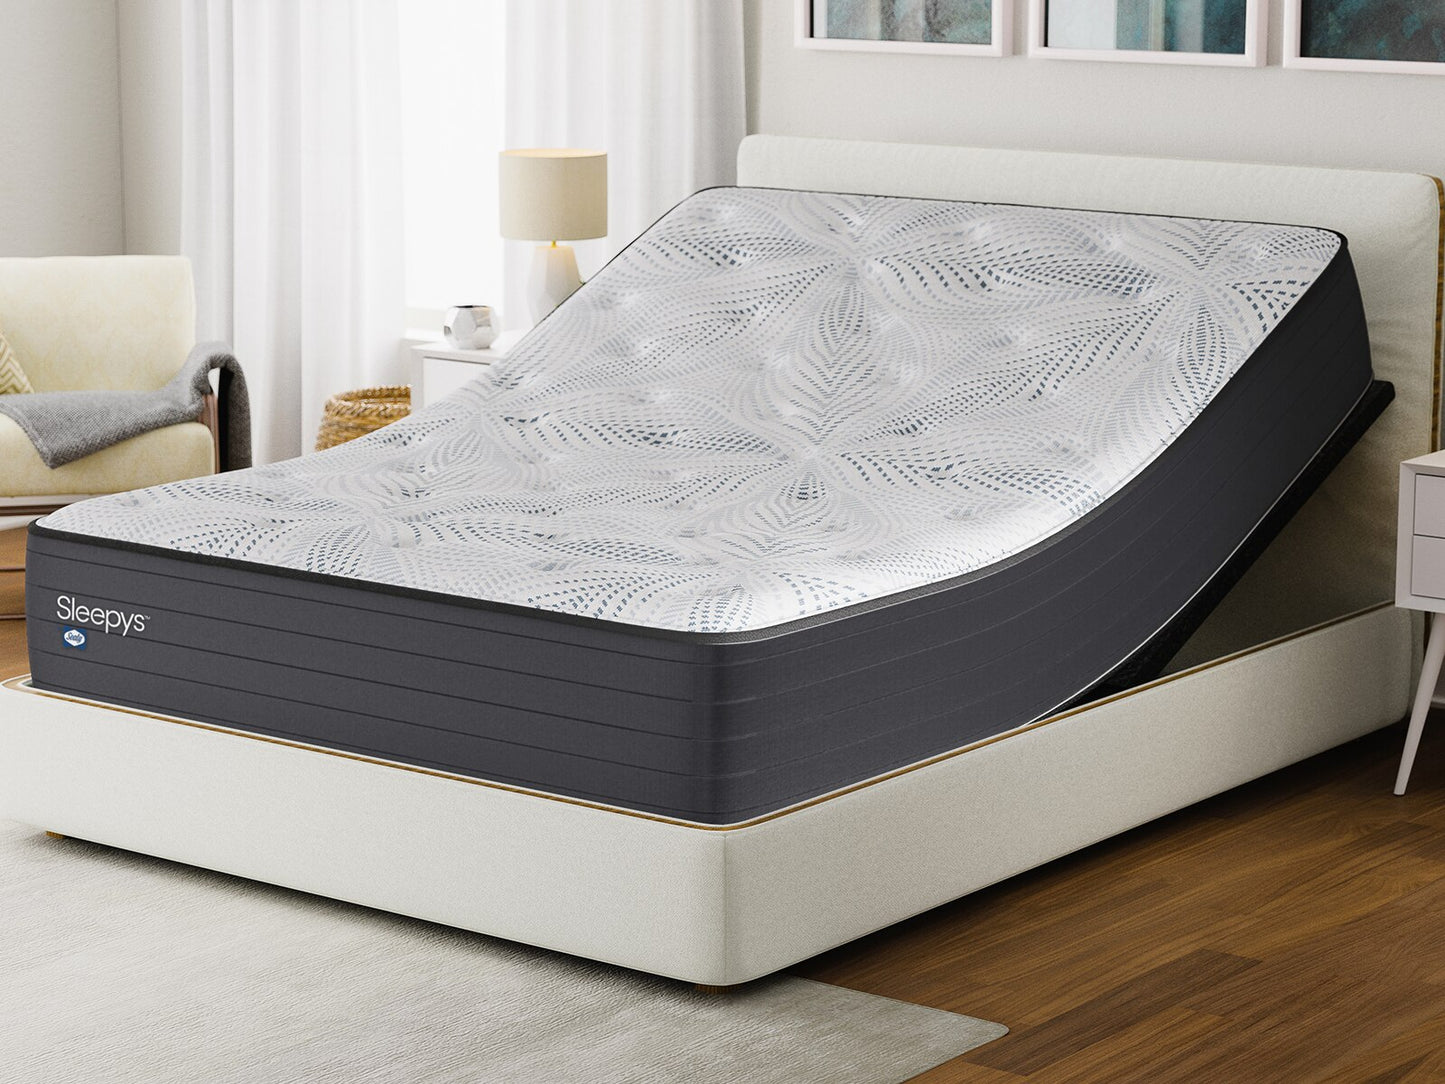 Sleepy's By Sealy® 12” Firm Mattress